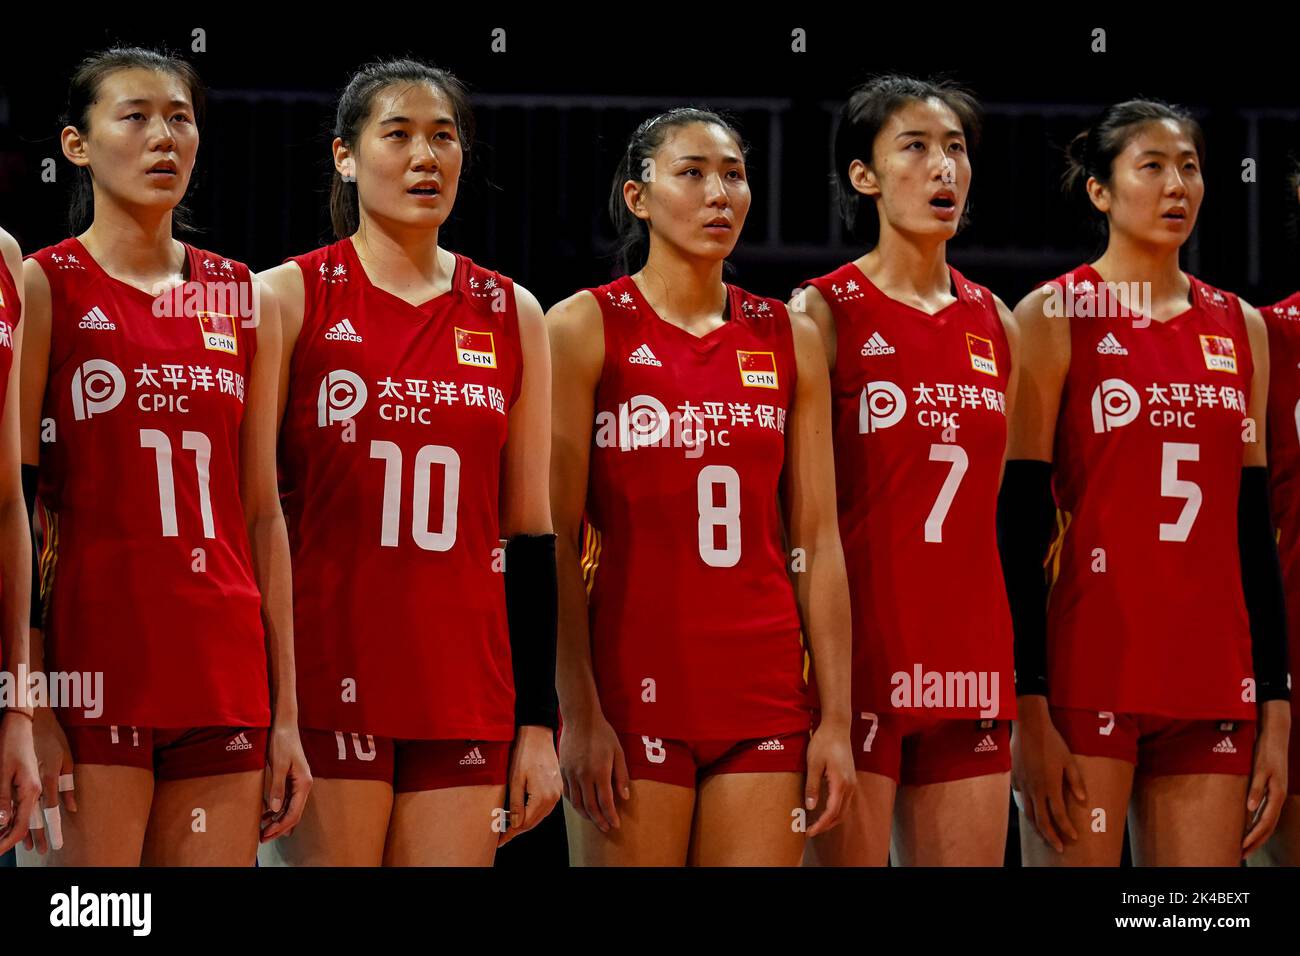 ARNHEM, NETHERLANDS - SEPTEMBER 25: Yizhu Wang of China, Yunlu Wang of China, Ye Jin of China, Yi Gao of China and Yuanyuan Wang of China line up for the national anthem during the Pool D Phase 1 match between China and Argentina on Day 3 of the FIVB Volleyball Womens World Championship 2022 at the Gelredome on September 25, 2022 in Arnhem, Netherlands (Photo by Rene Nijhuis/Orange Pictures) Stock Photo